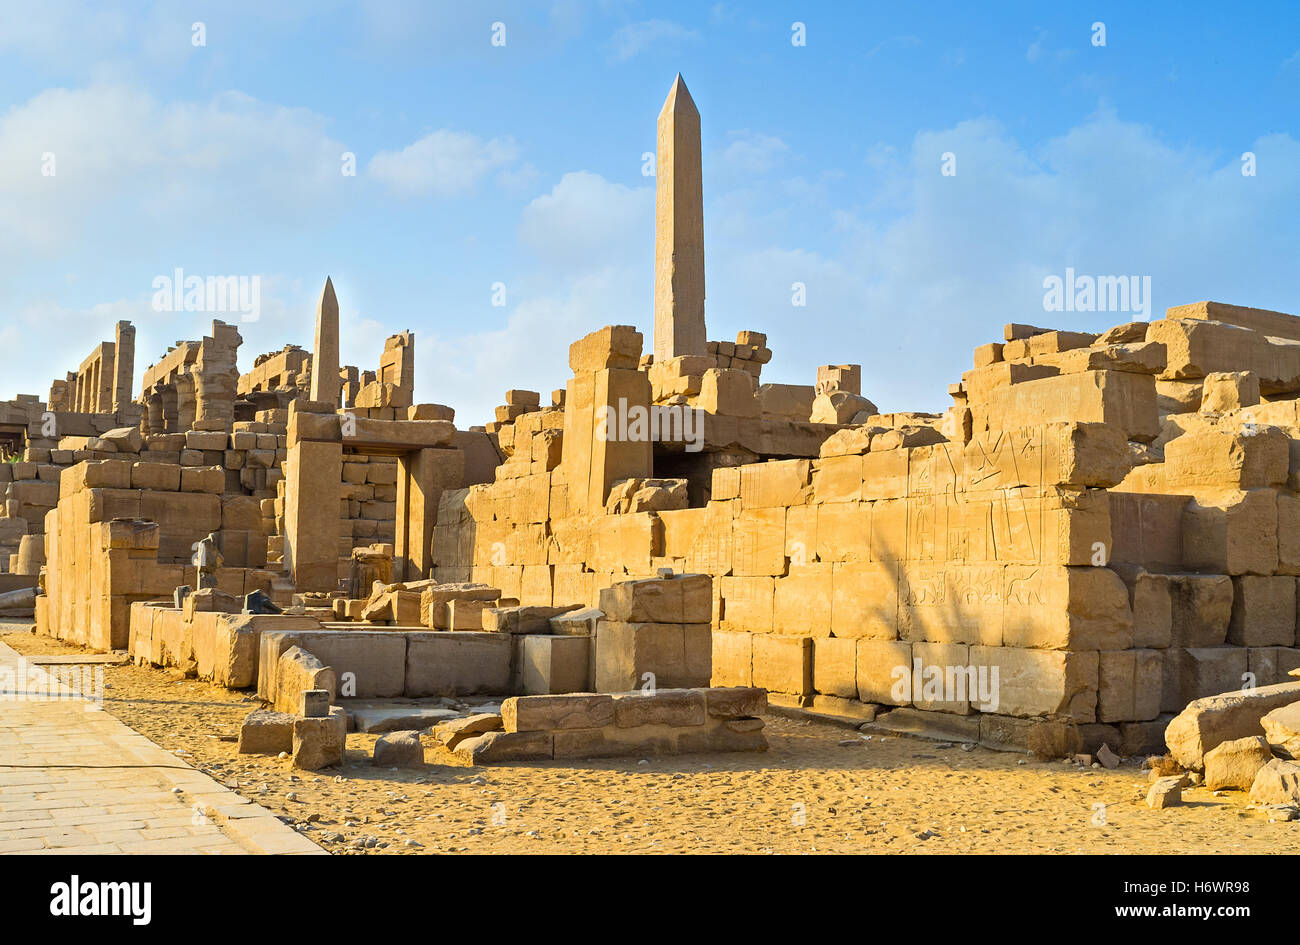 The ruins of Karnak Temple Complex with the rising granite obelisks on the background, Luxor, Egypt. Stock Photo